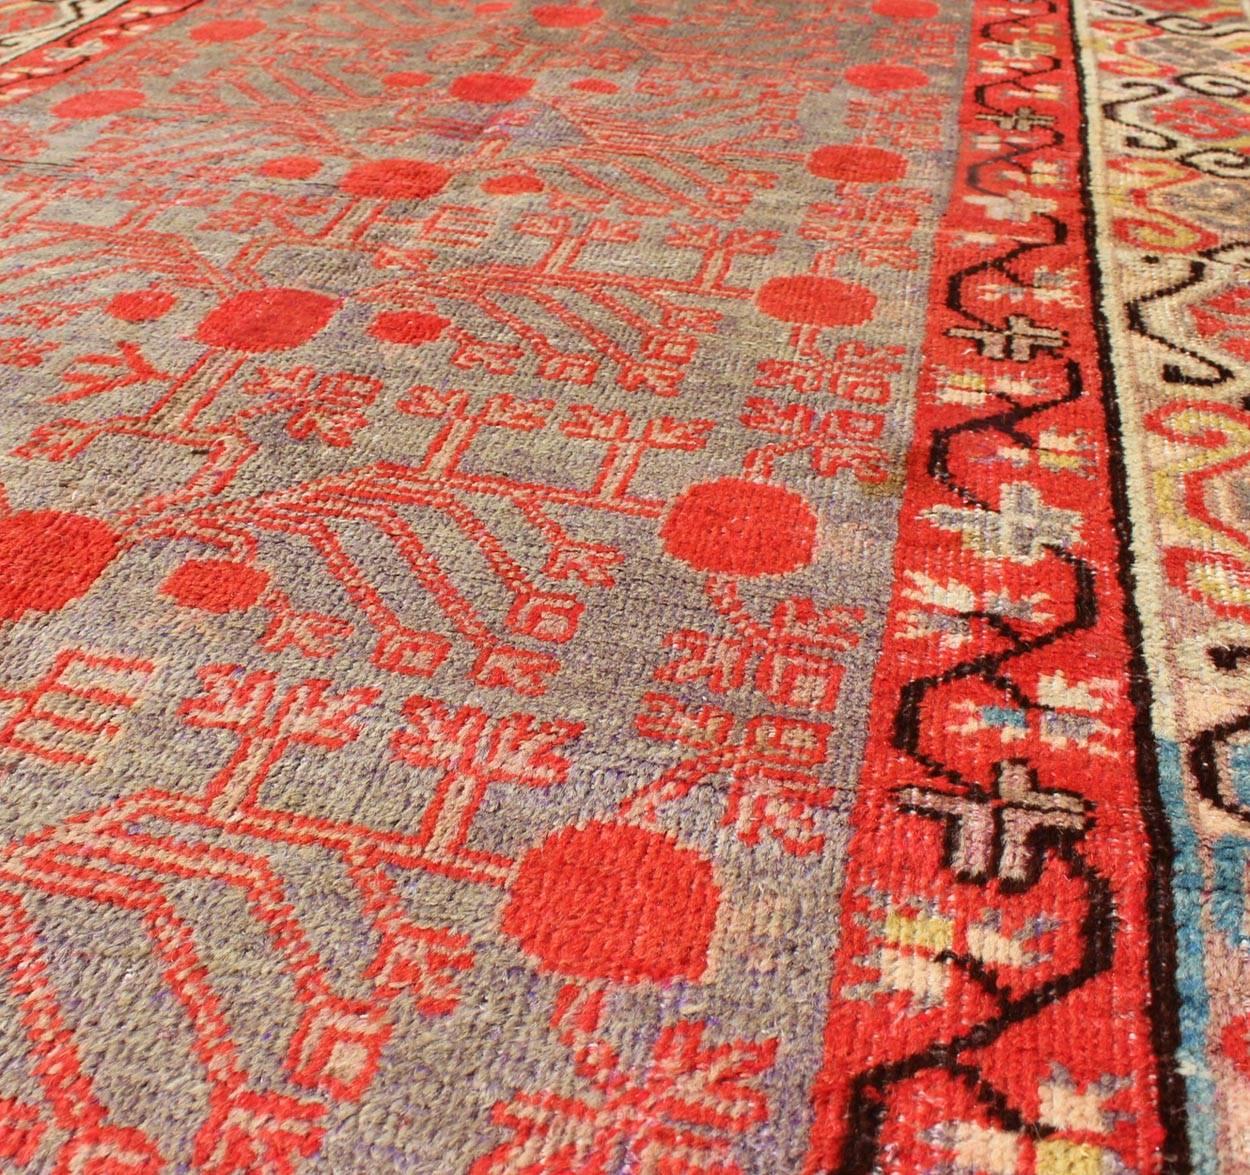 Intricate Vintage Khotan Rug with Sub-Geometric Design in Reds and Light Blue In Good Condition For Sale In Atlanta, GA